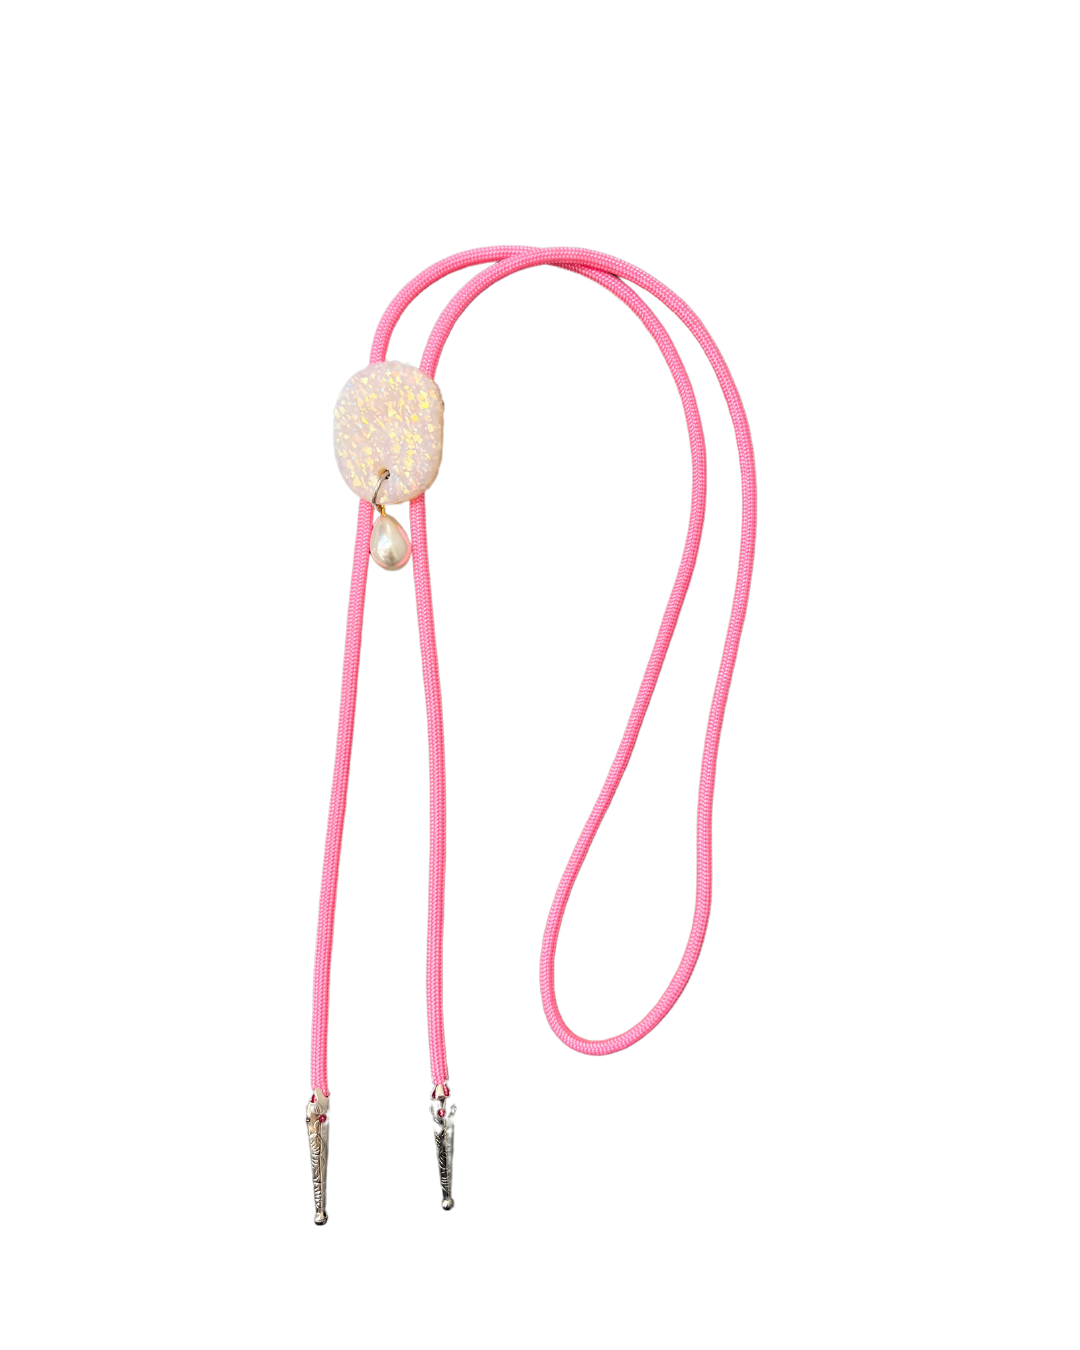 Opal Iridescent Oval with Pearls #1 on Light Pink Cording Bolo Tie